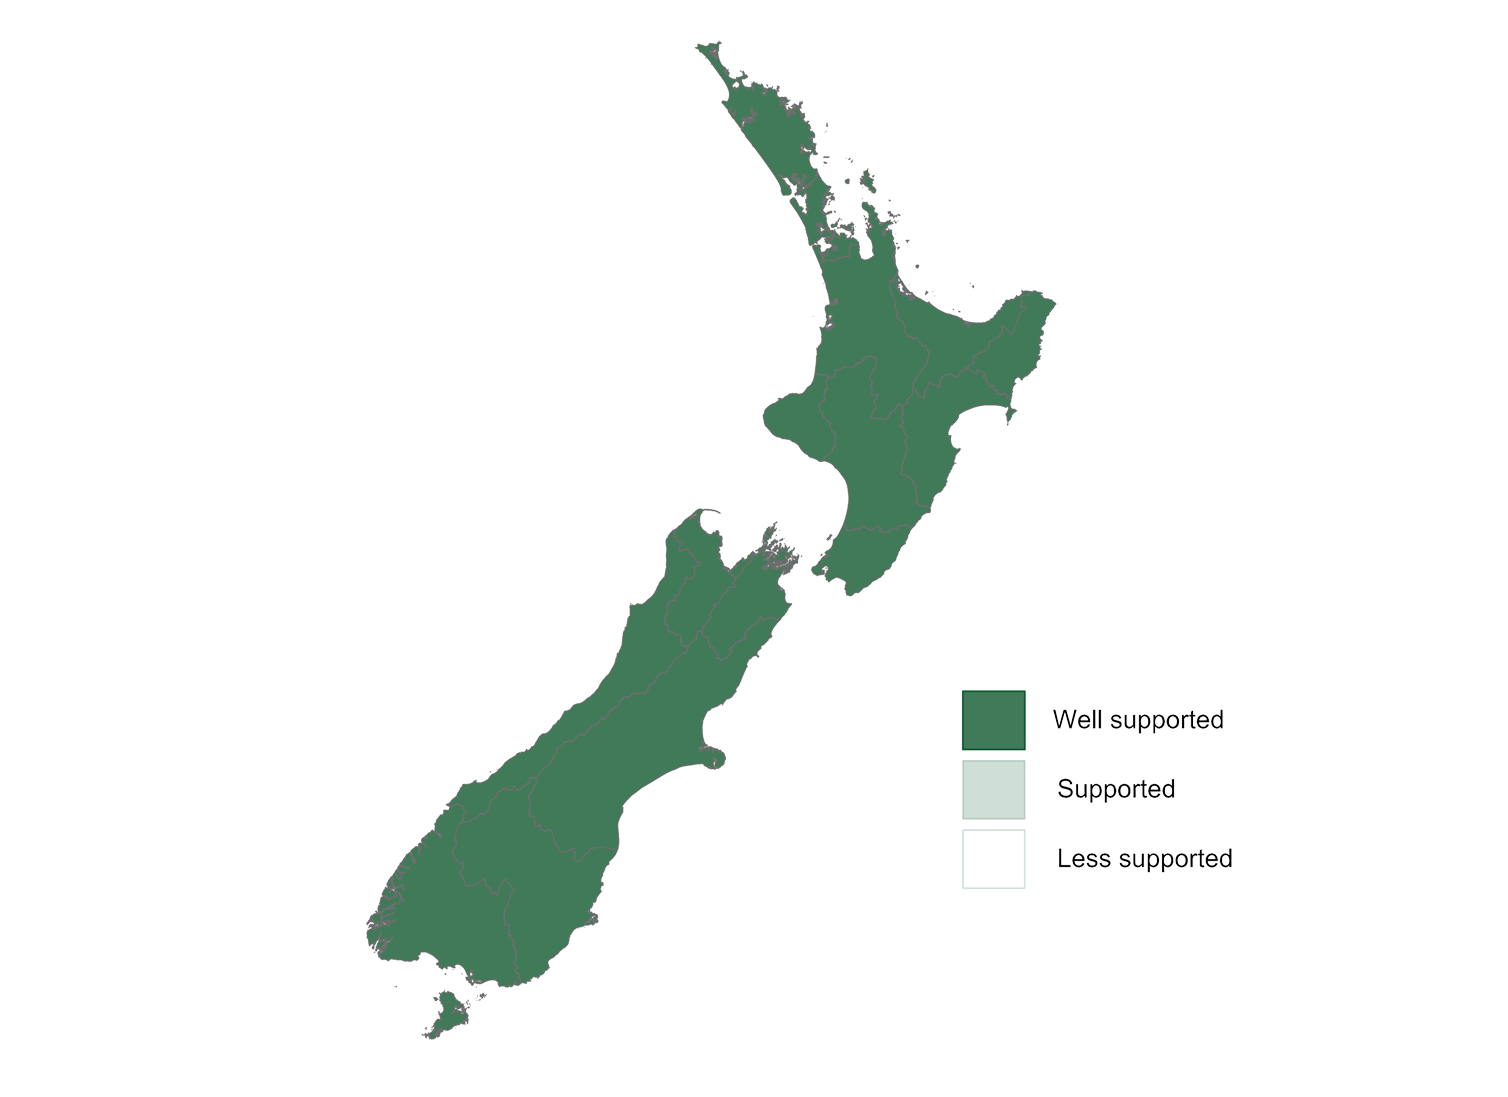 New Zealand map showing that covered cropping is supported in all regions.